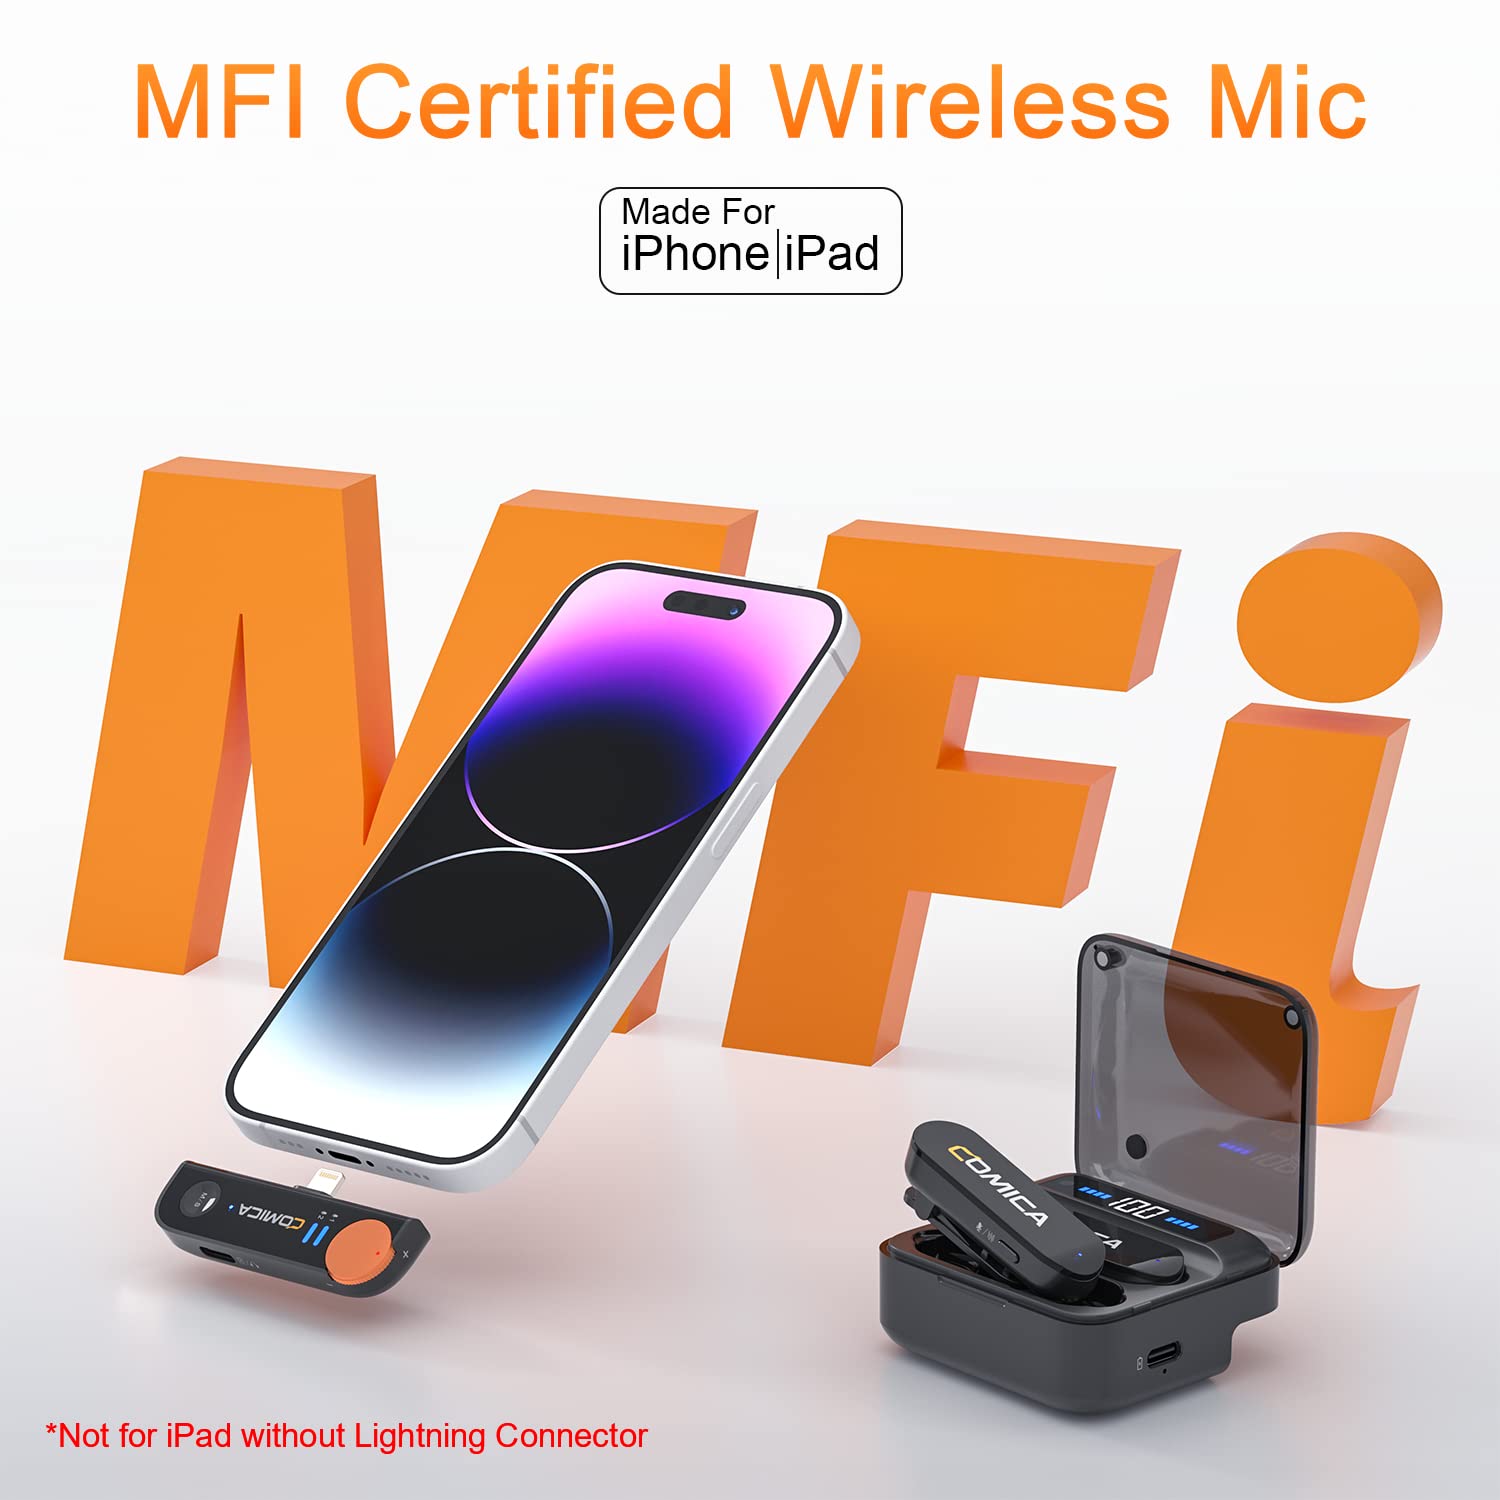 comica Vimo S MI Wireless Lavalier Microphone for iPhone, MFI Certified, Noise Cancelling, 15HR Battery, 656' Transmission, Dual Wireless Lapel Mic for iPhone Video Recording Vlogs Live Stream